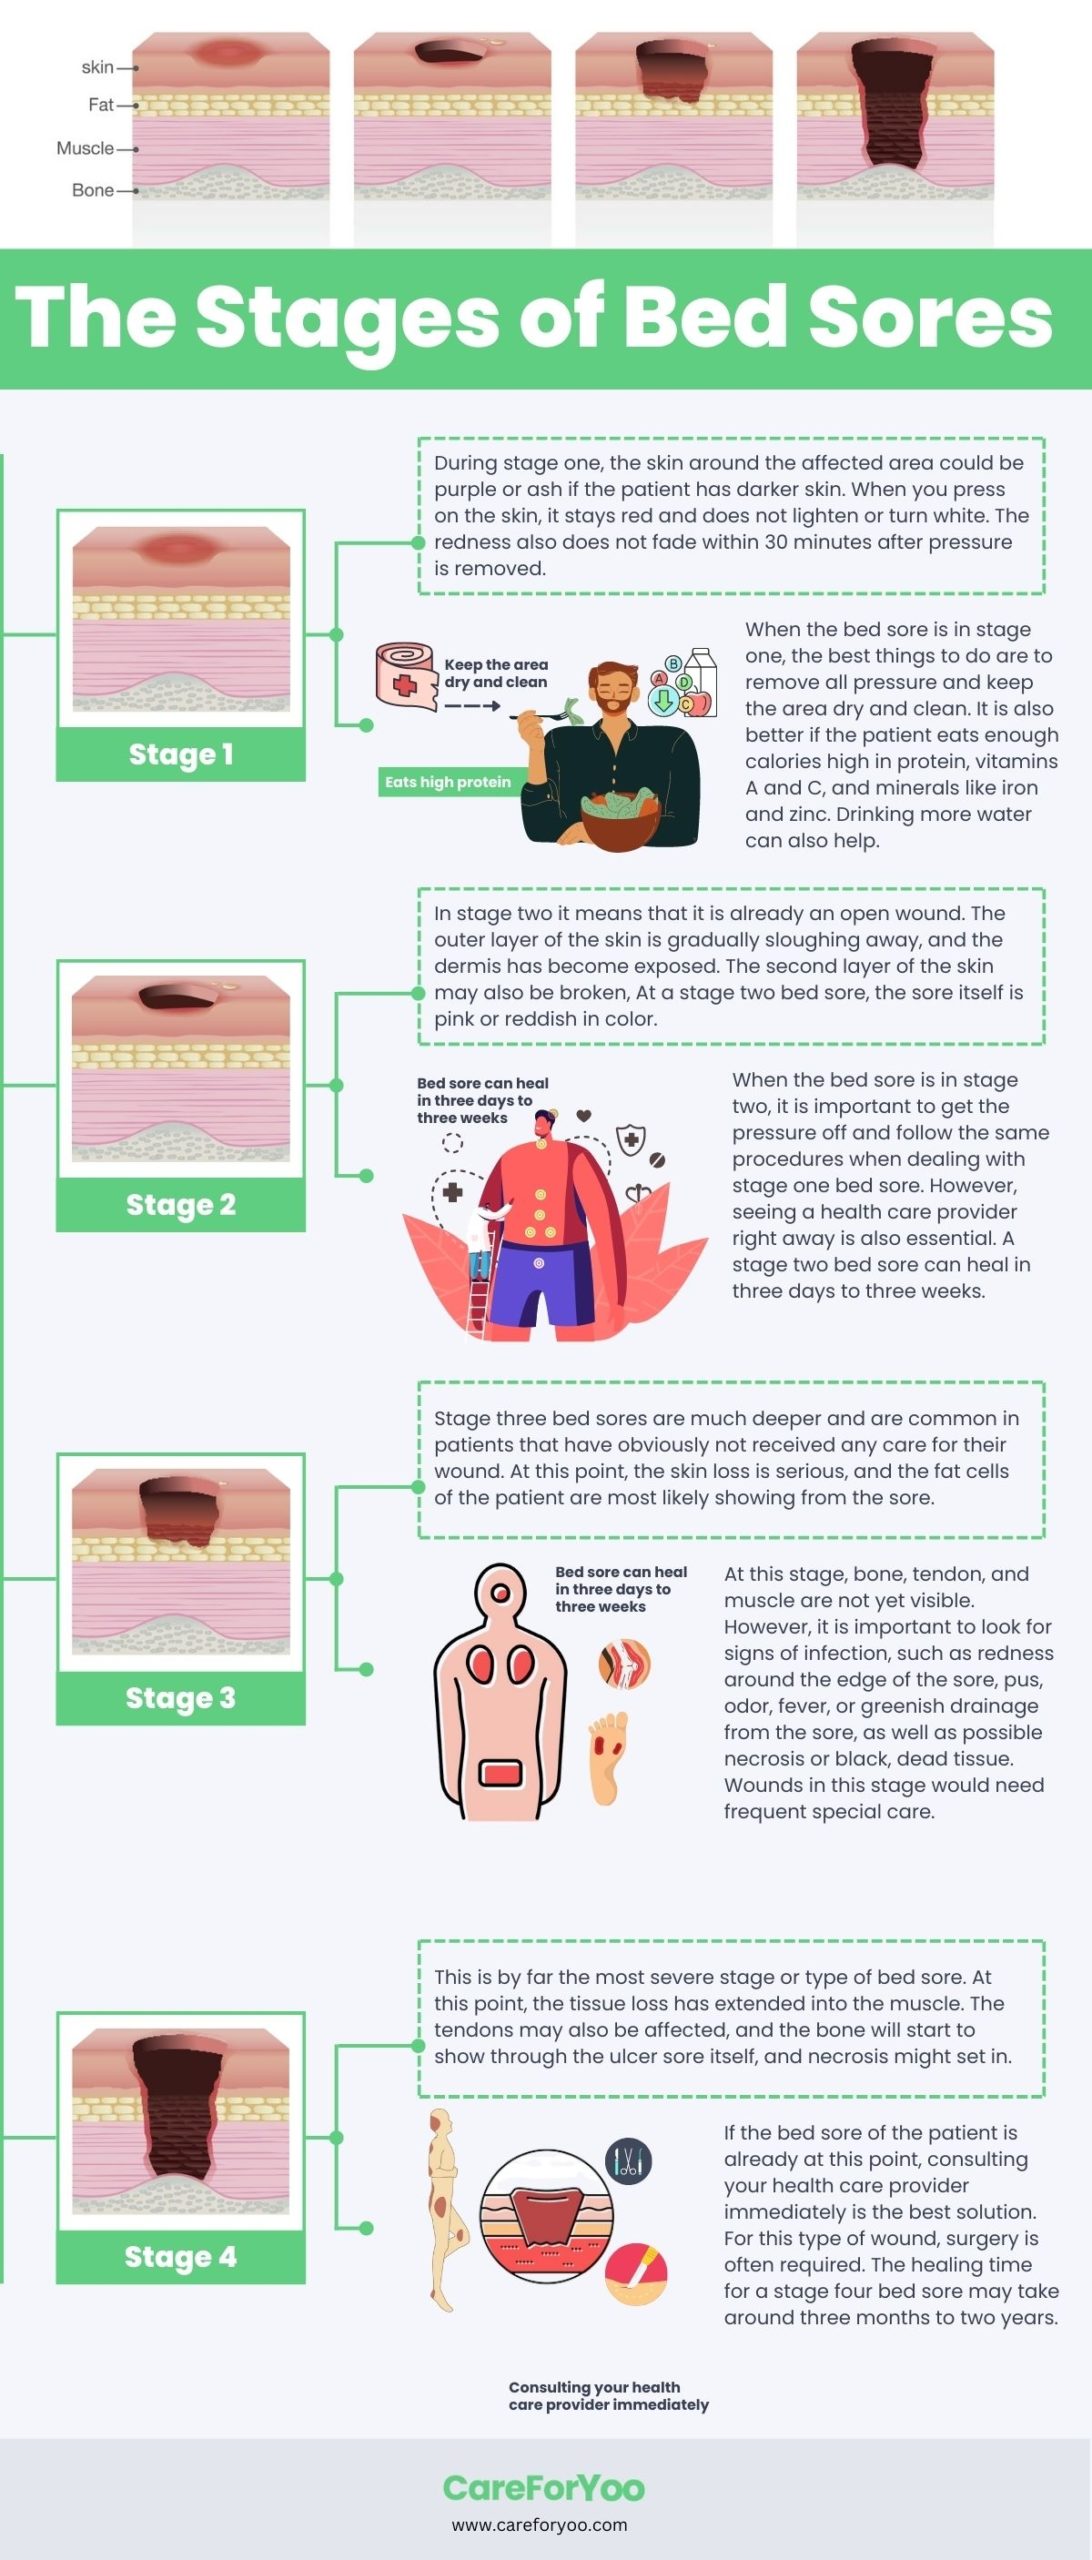 An illustrated guide detailing the different stages and progression of bed sores.